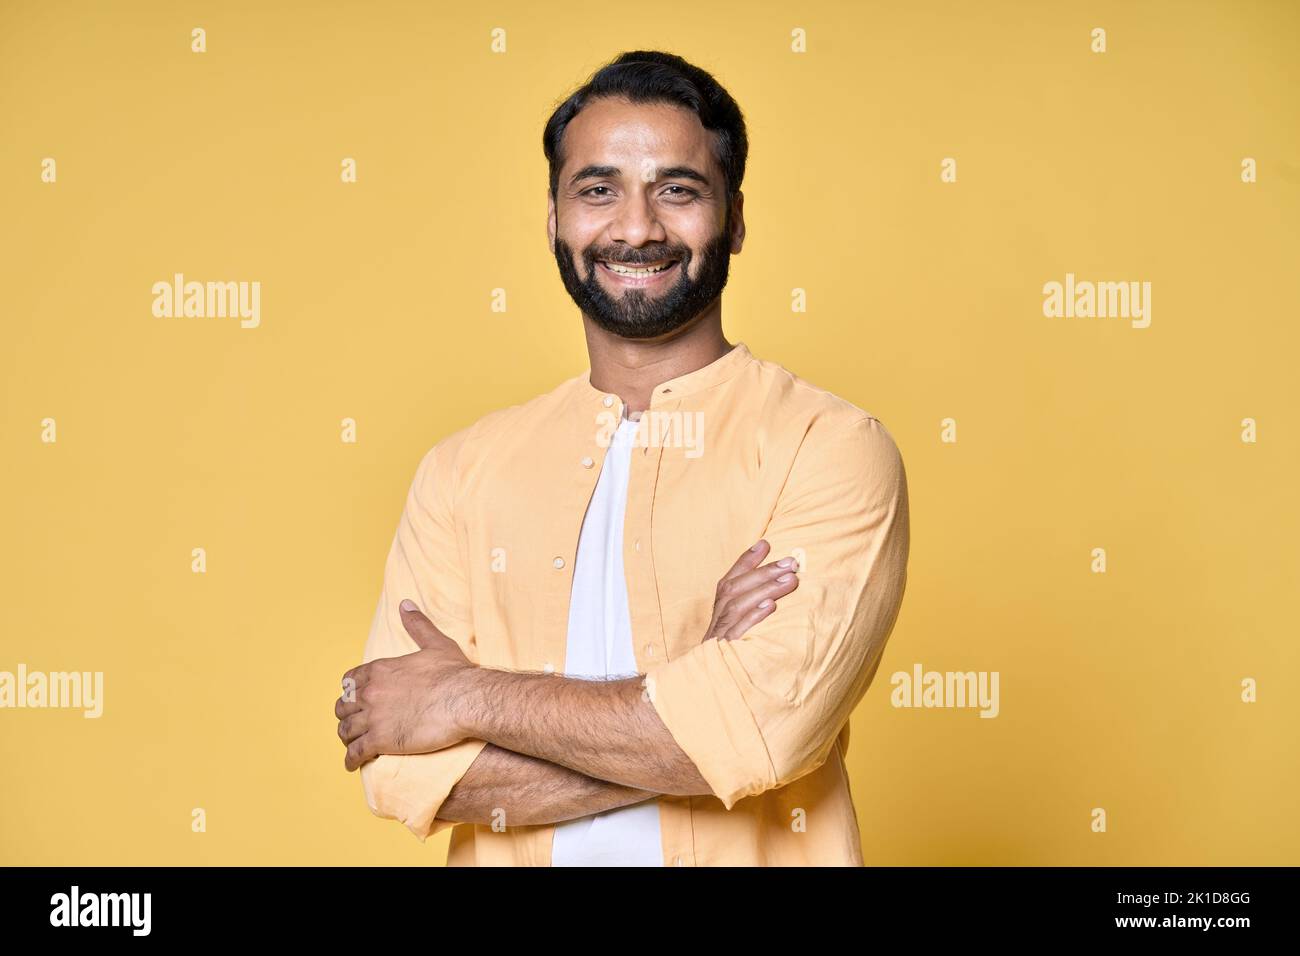 Smiling confident bearded indian man standing isolated on yellow background. Stock Photo